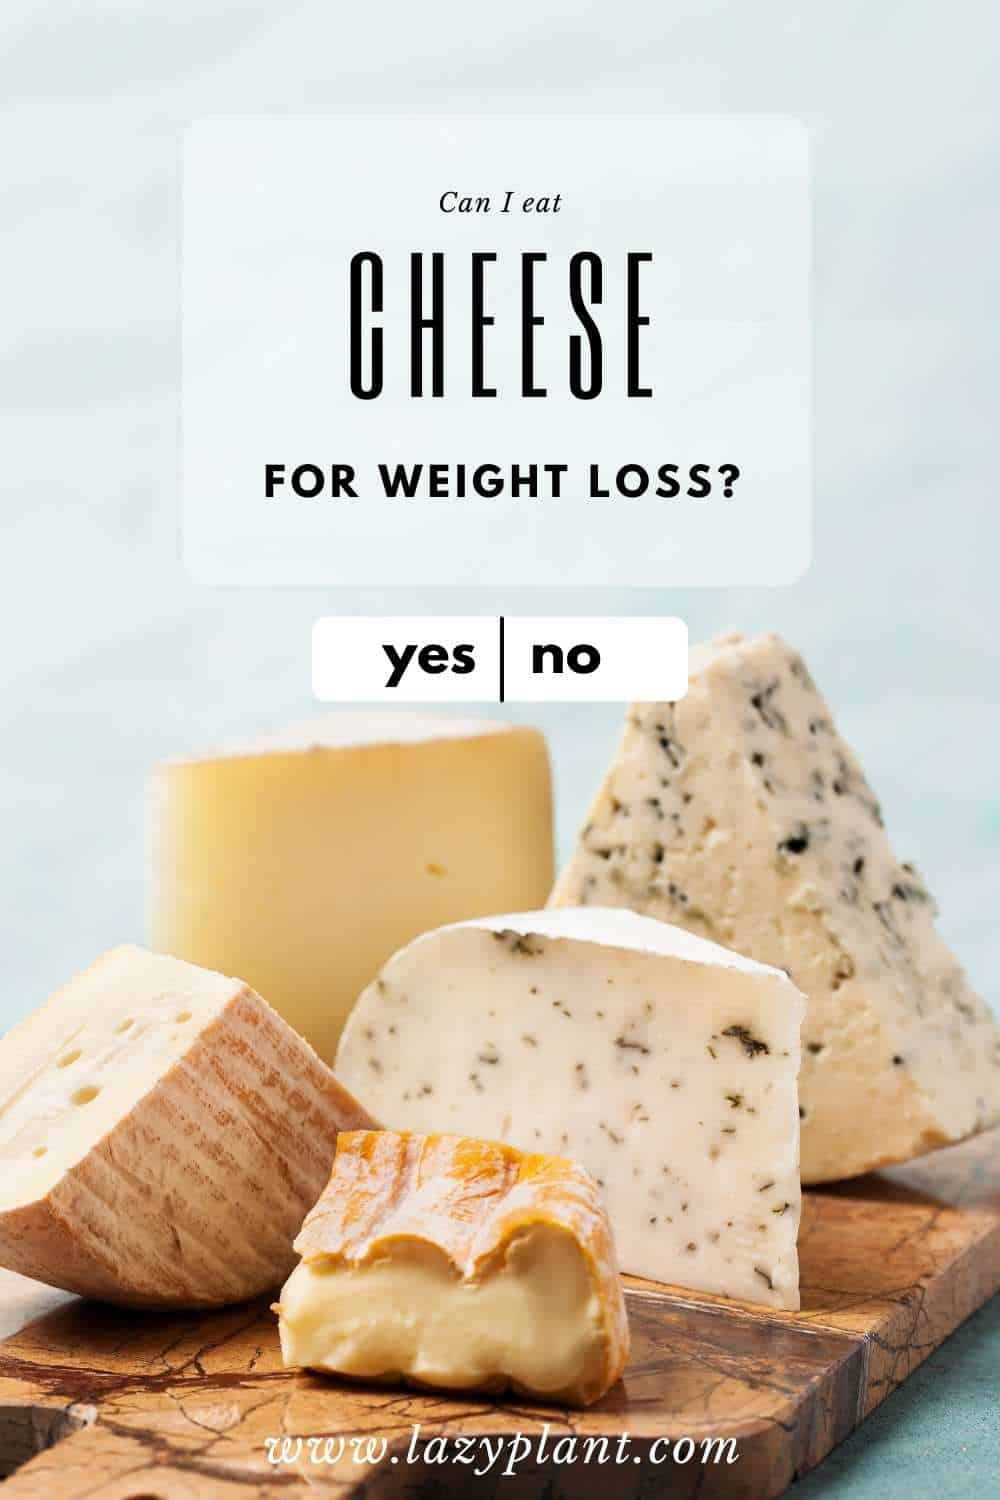 How to eat cheese for weight loss?